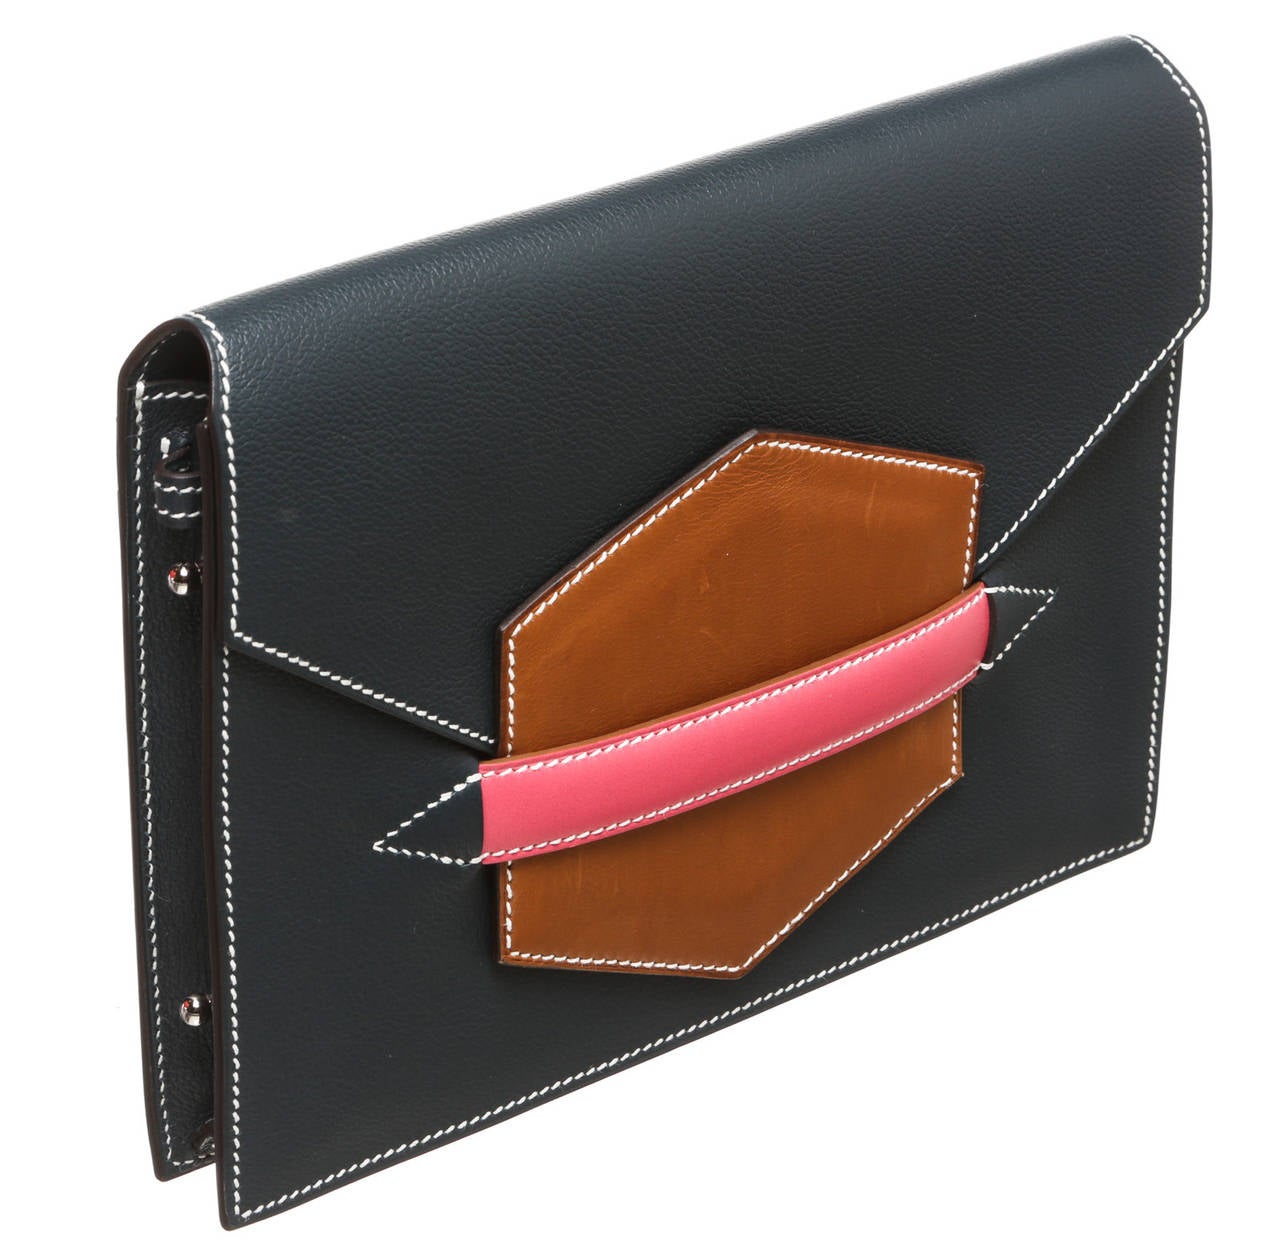 Featured here is this gorgeous and highly coveted Hermes clutch handbag that will become your new favorite! Find out why we are going crazy over this tricolored handbag which is crafted from a dark blue swift leather with a large complementary brown